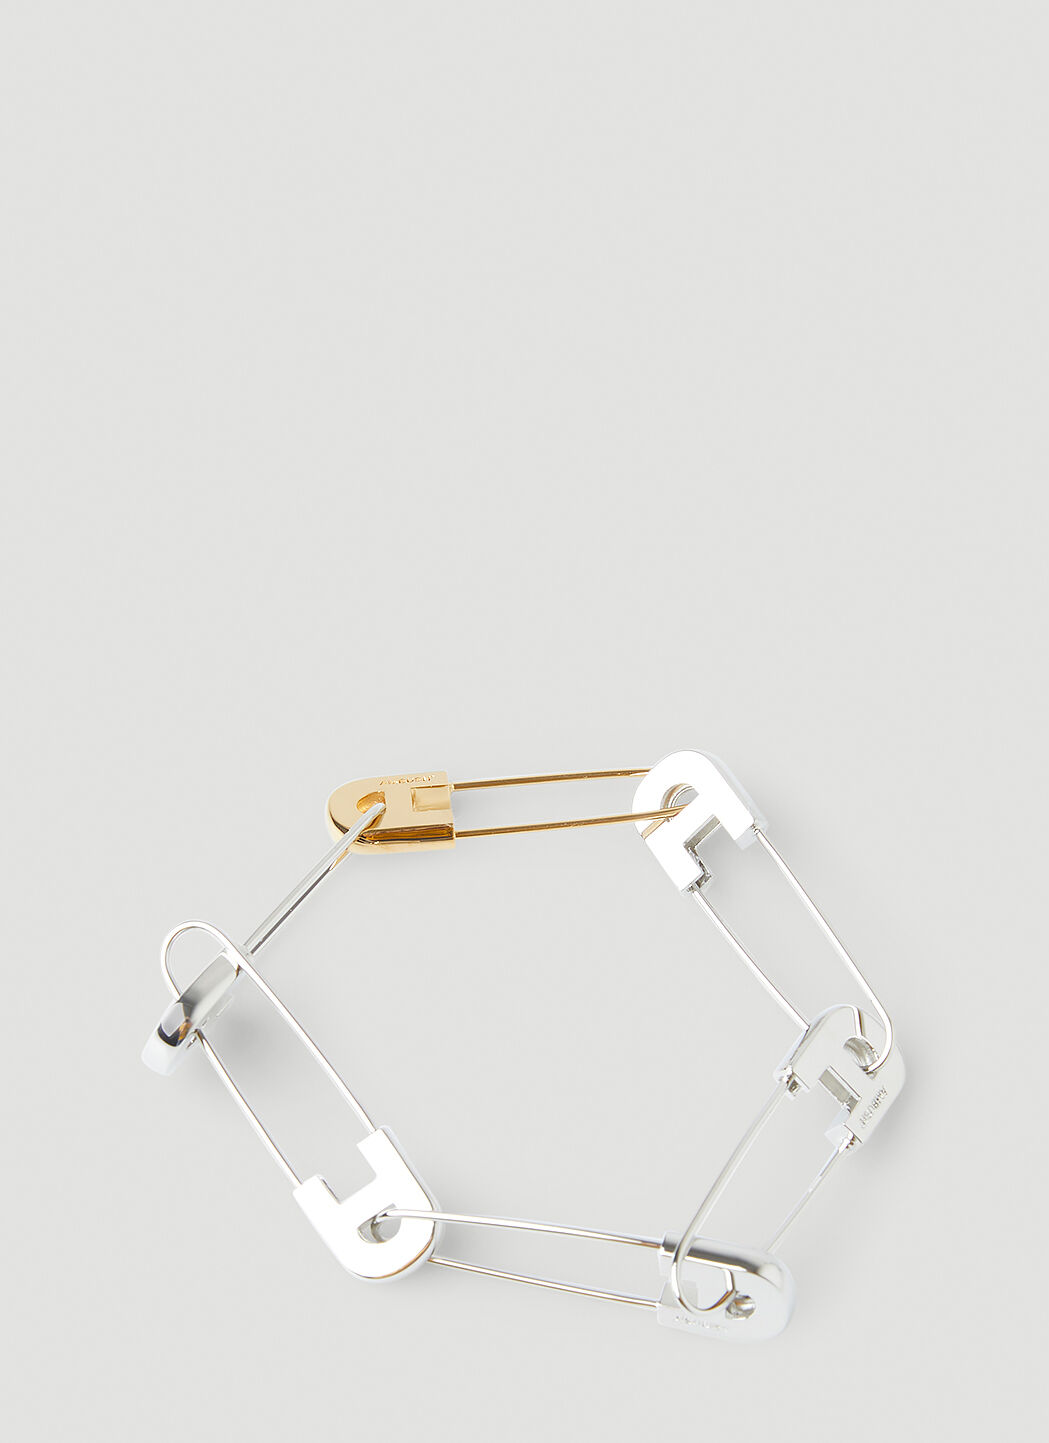 Safety Pin Bracelet by AMBUSH - Only 690 €! : r/delusionalartists